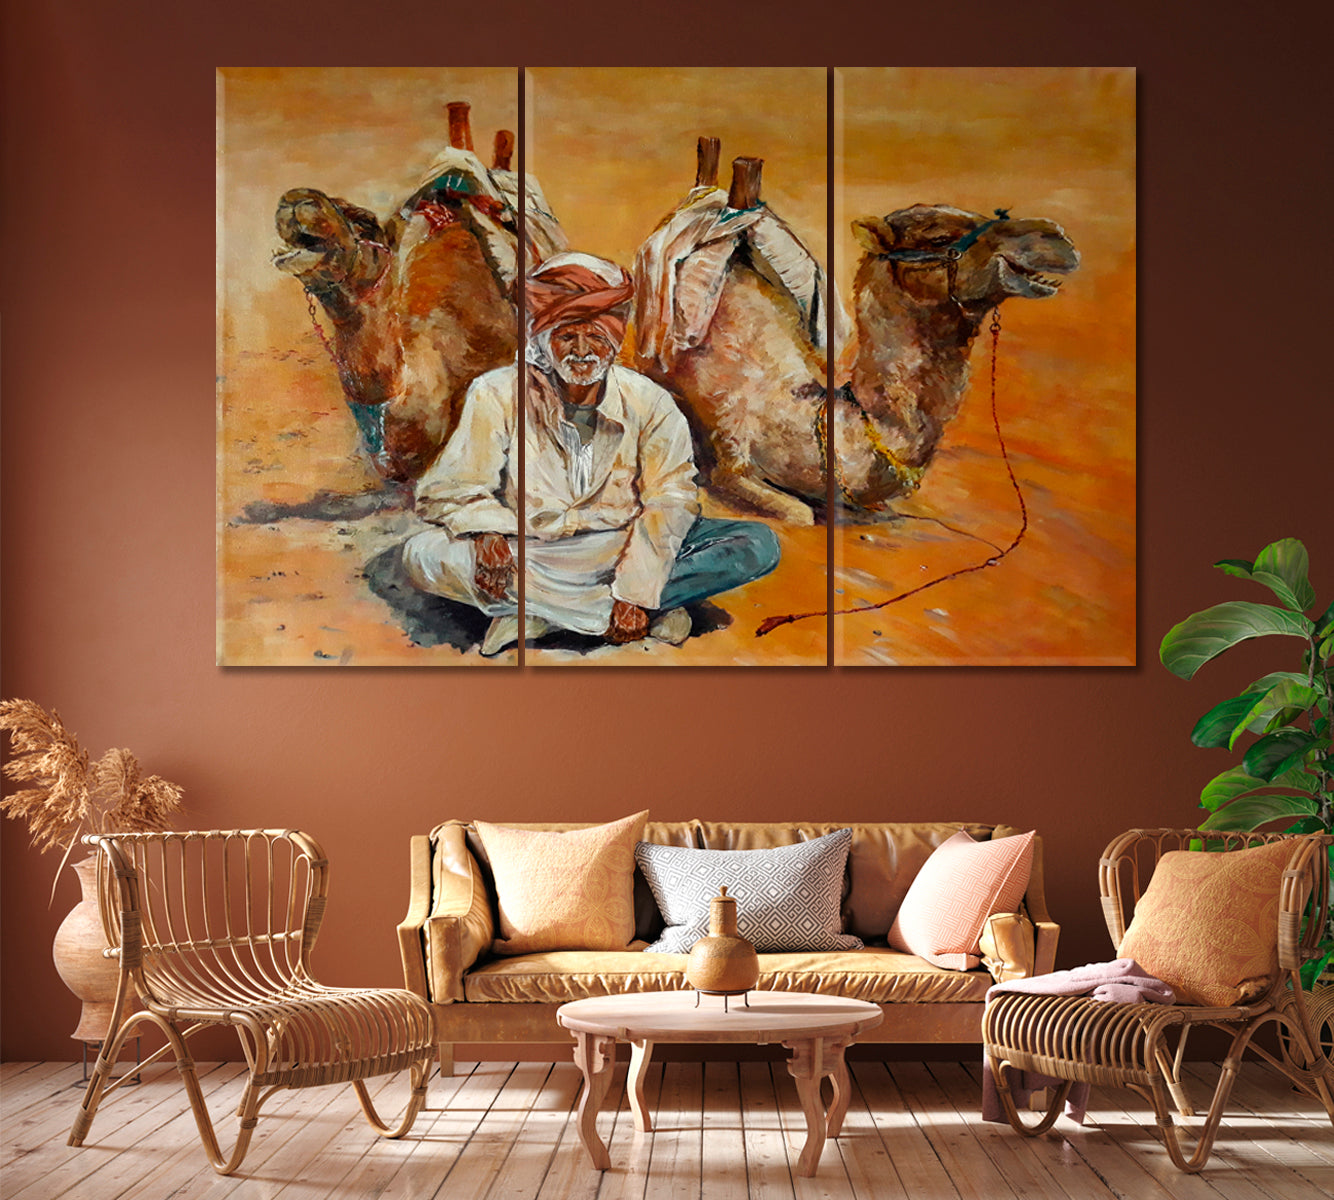 Old Bedouin with Camels in Desert Canvas Print ArtLexy 3 Panels 36"x24" inches 